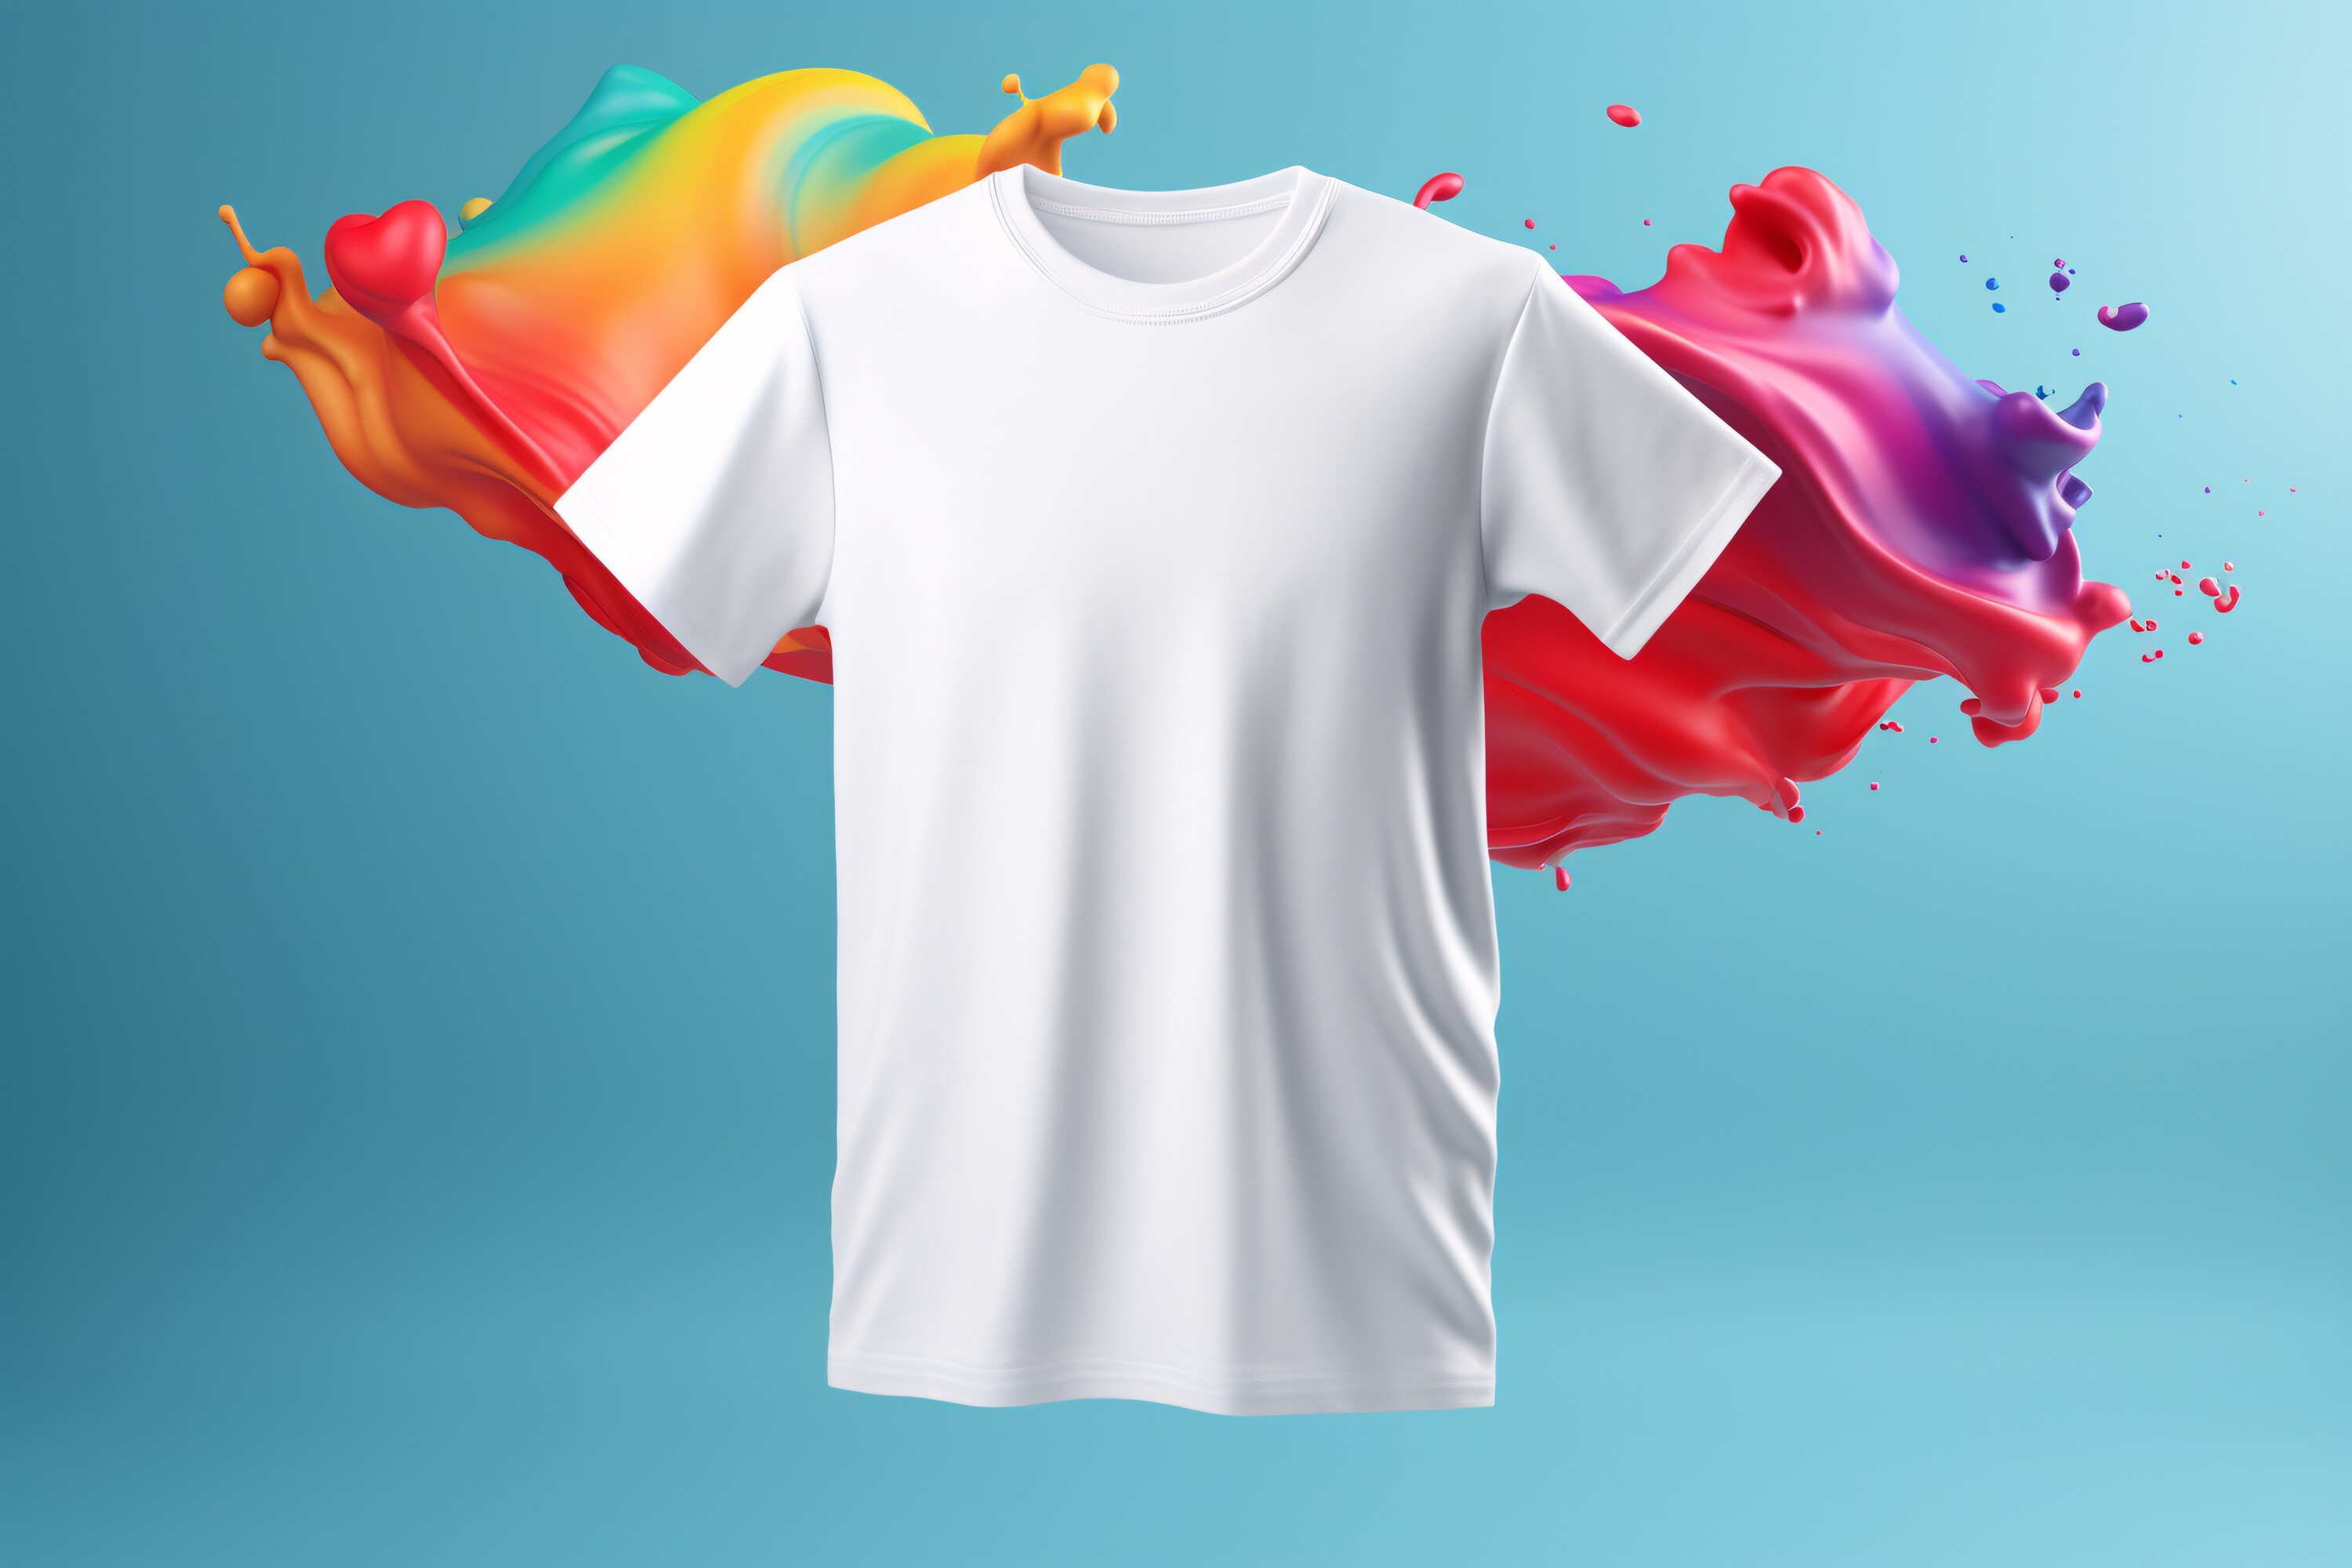 Floating T-shirt 3D Mockup Graphic by Forhadx5 · Creative Fabrica